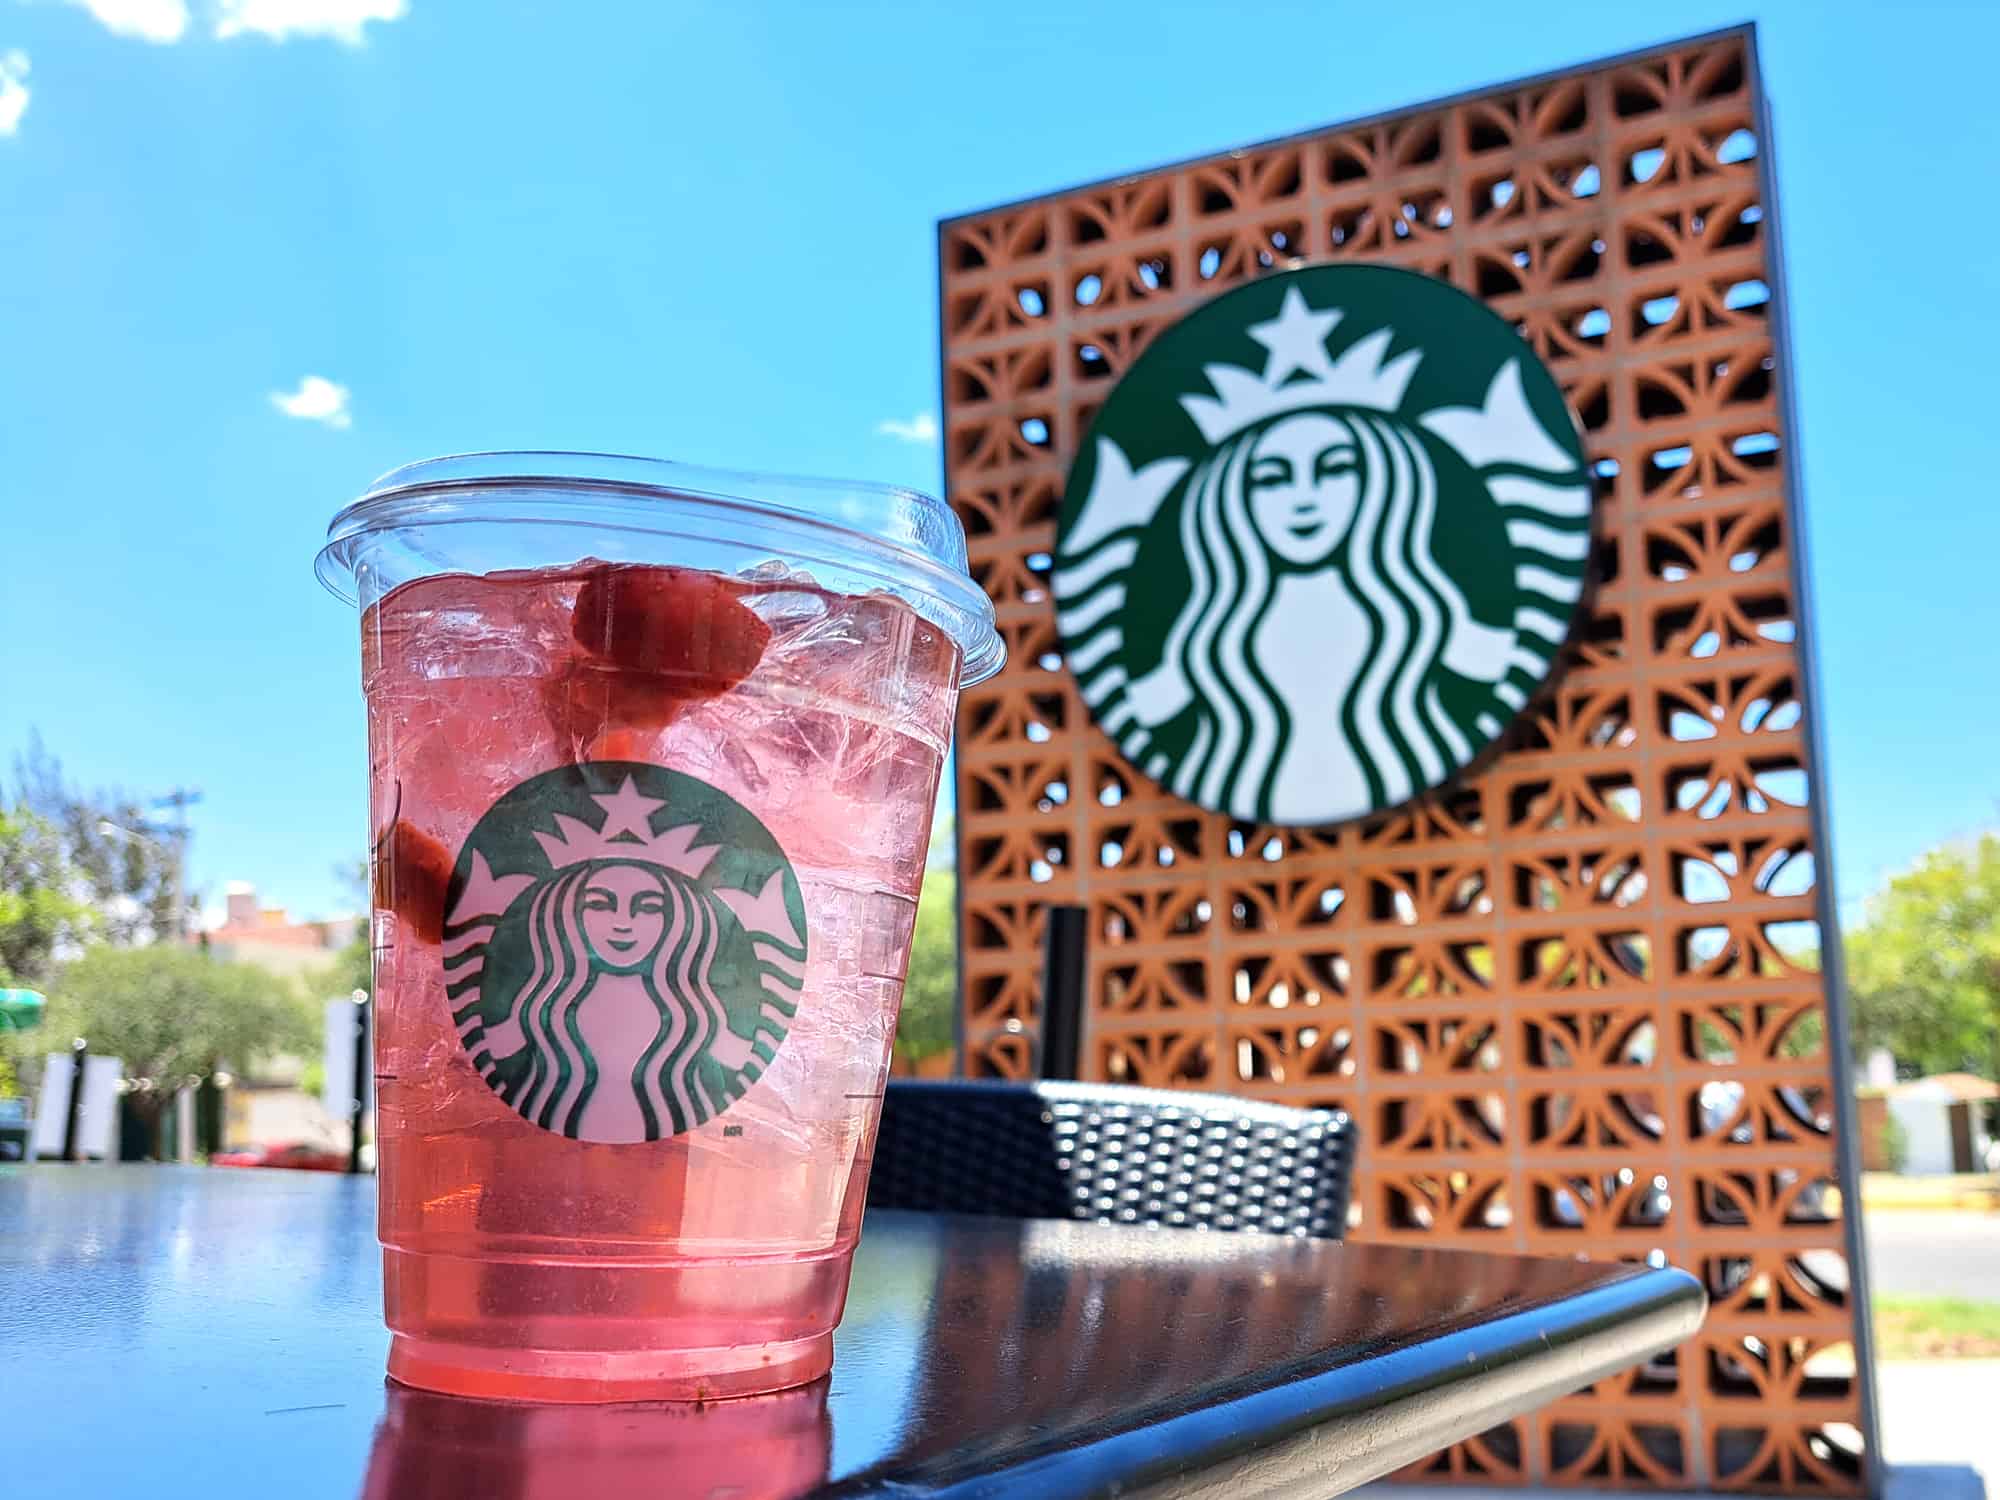 Starbucks Reusable Cup-tropical Starbucks Cup-hibiscus Starbucks Cup Custom  Starbucks Cup-free Straw Topper With Purchase 